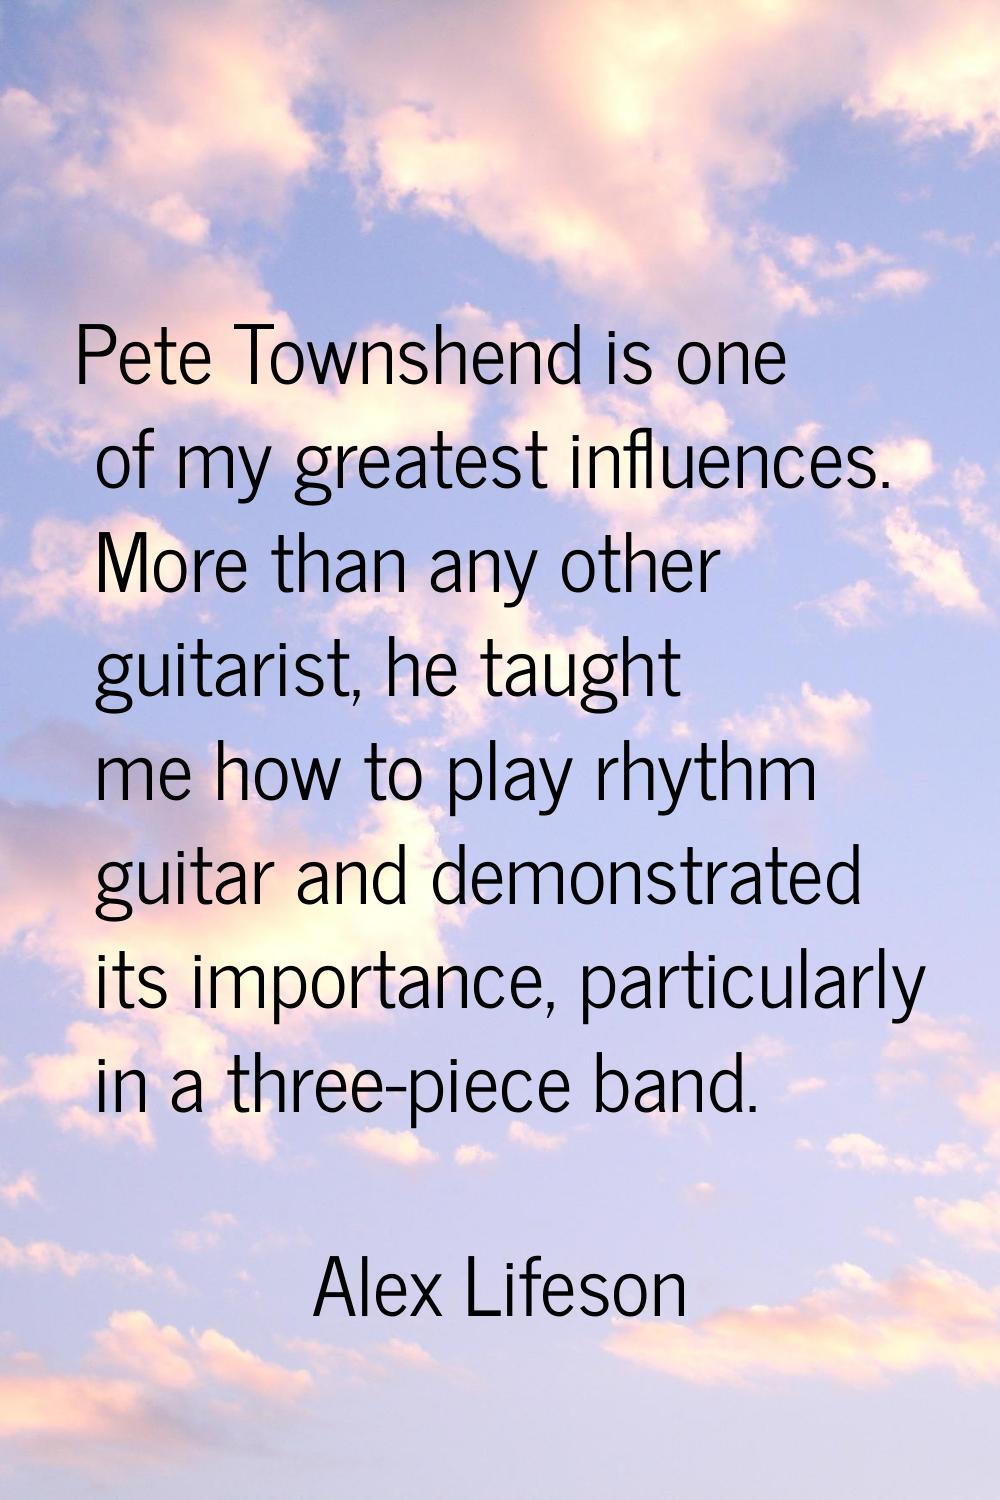 Pete Townshend is one of my greatest influences. More than any other guitarist, he taught me how to